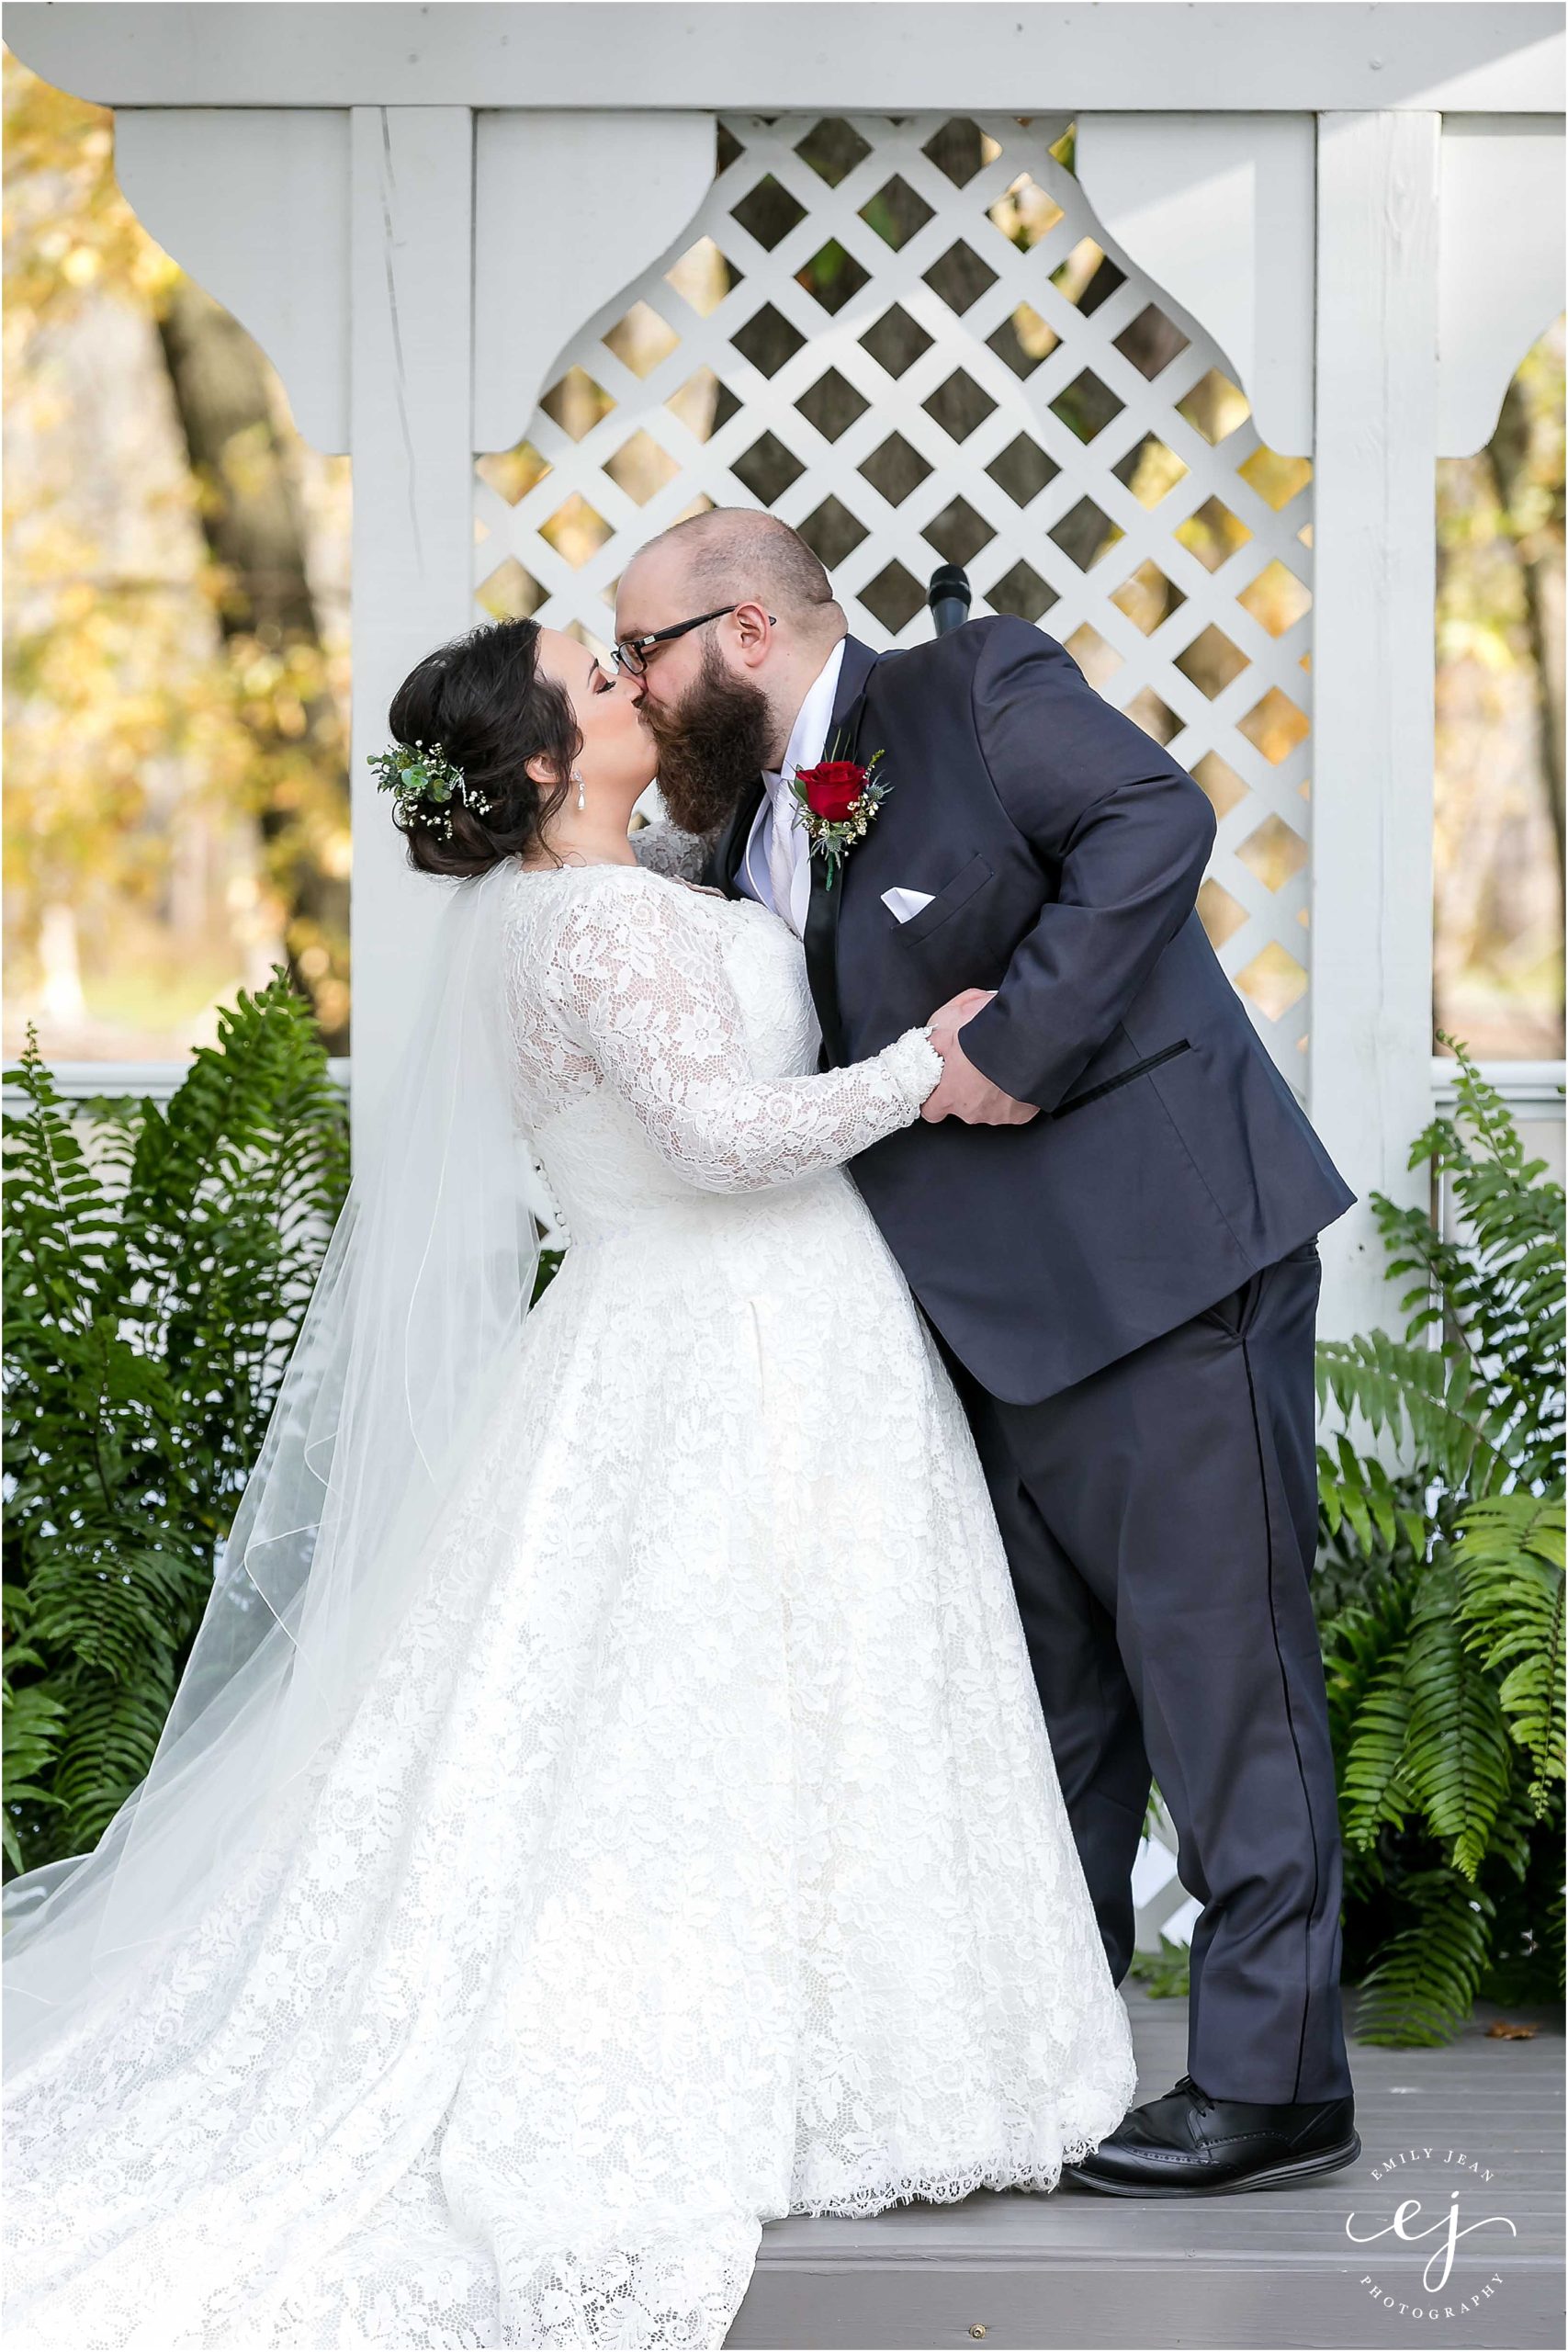 first kiss as husband and wife at outdoor ceremony